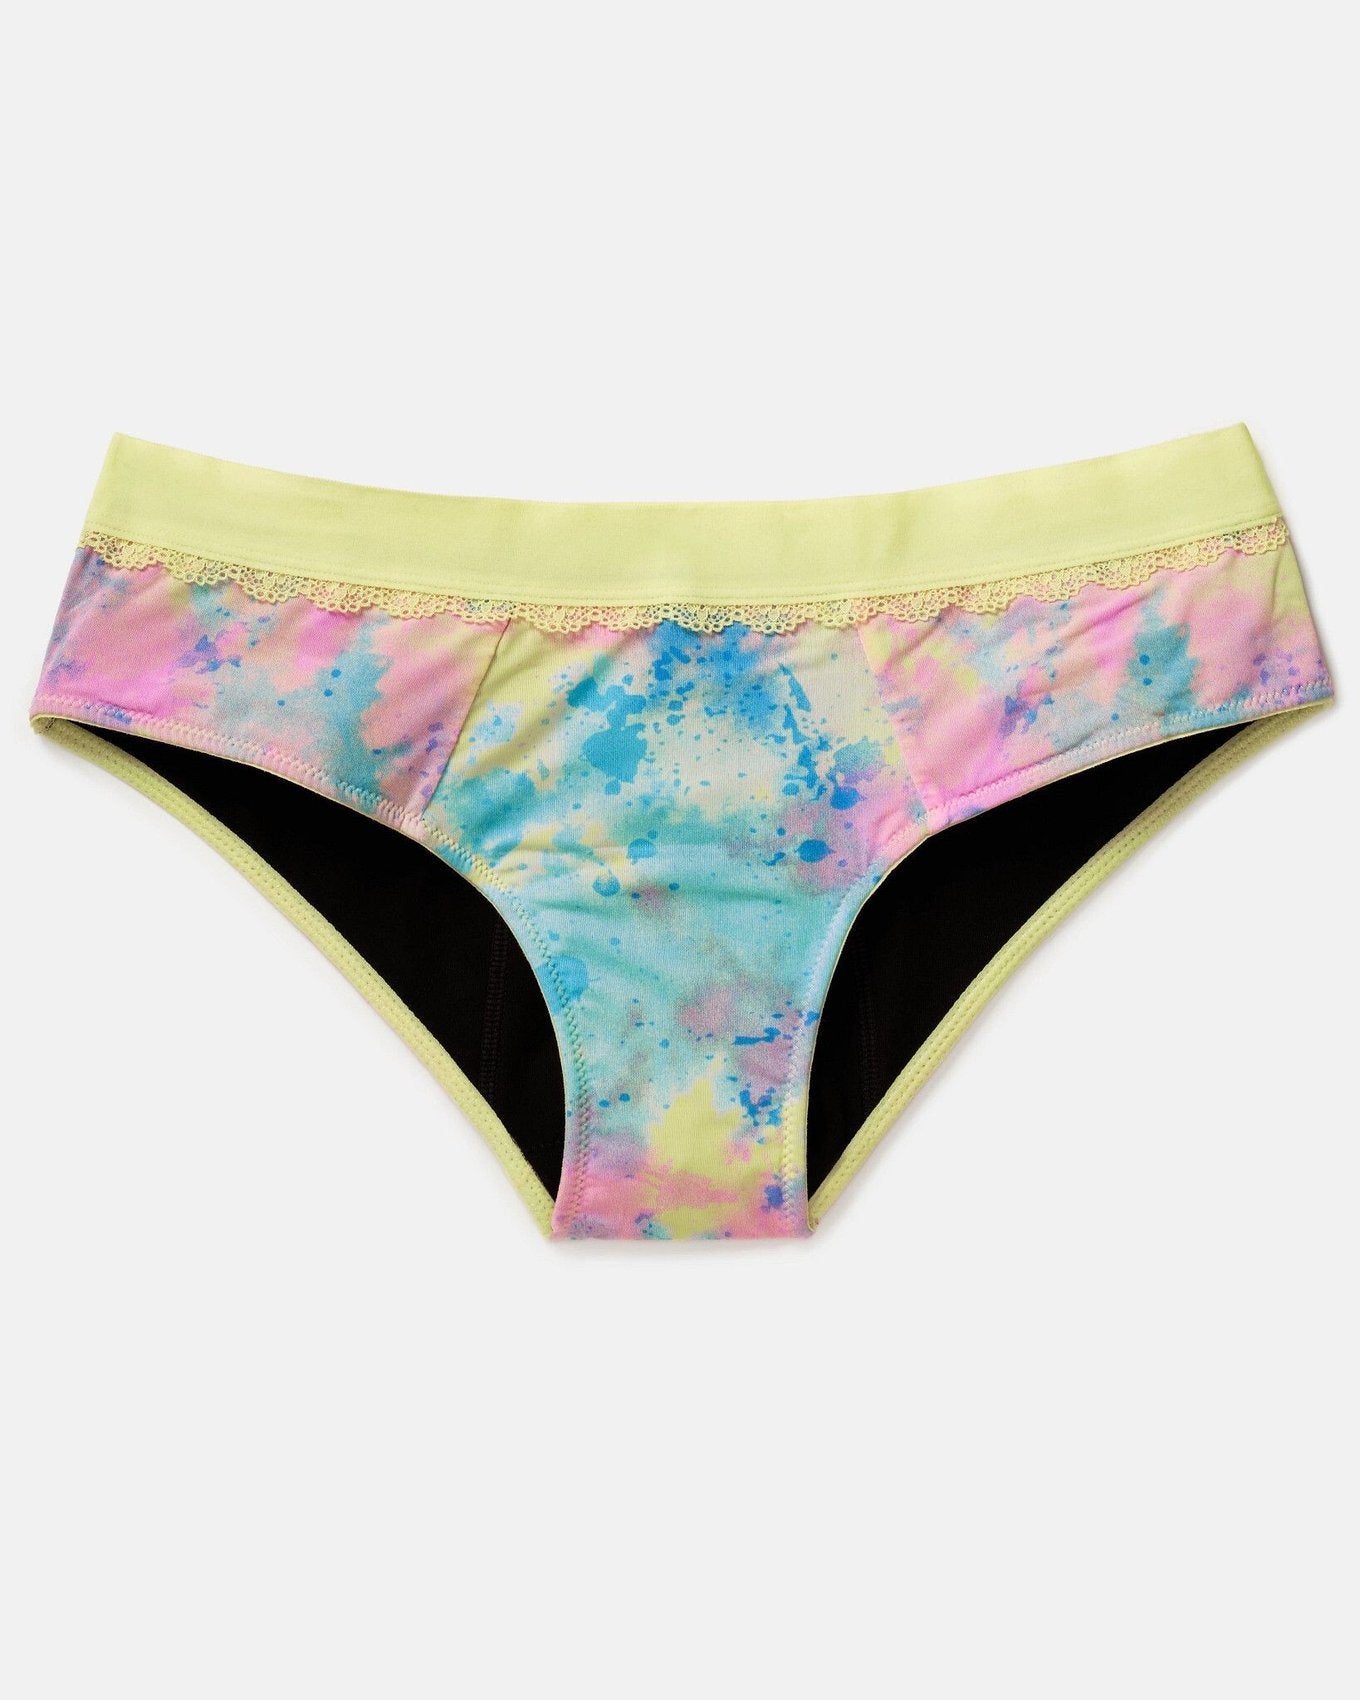 Joyja Cindy period-proof panty in color Melted Tie Dye C02 and shape cheeky